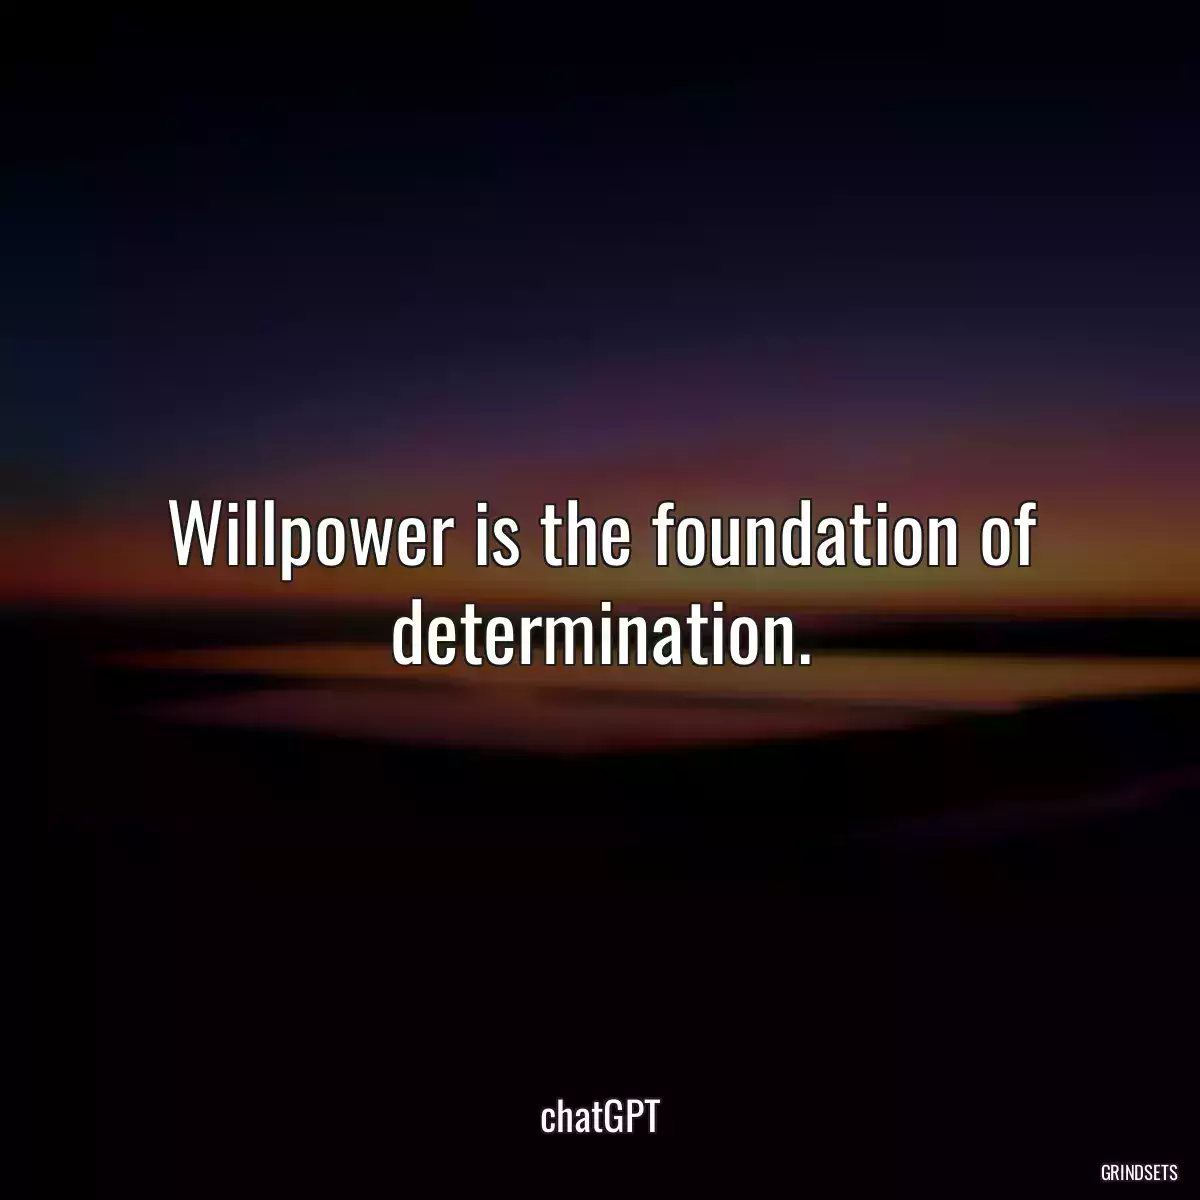 Willpower is the foundation of determination.